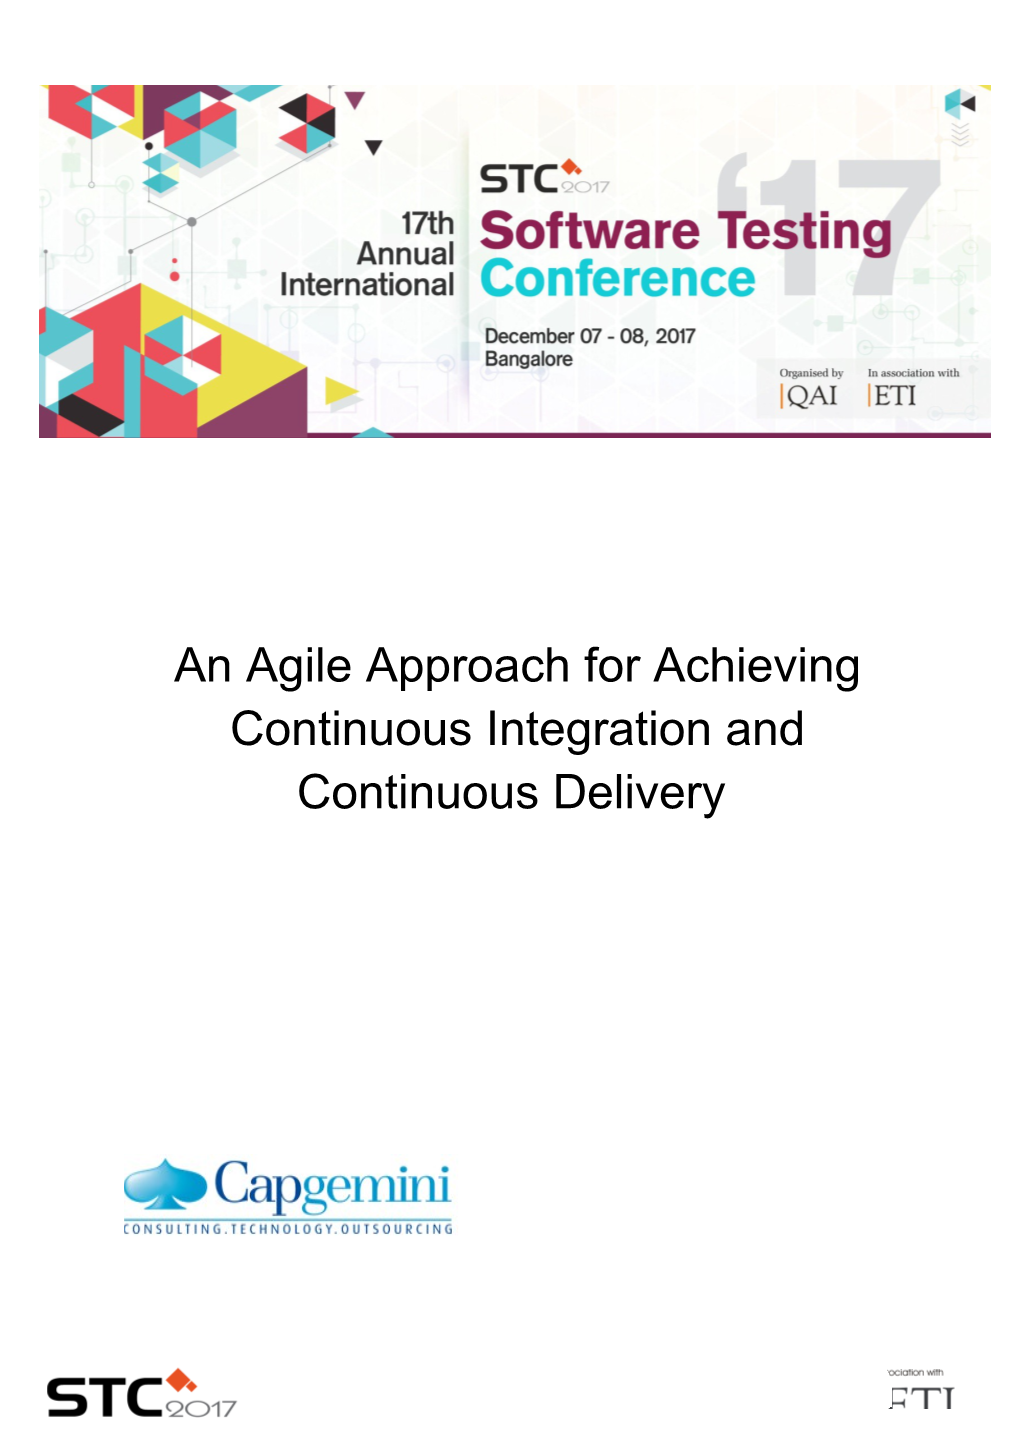 An Agile Approach for Achieving Continuous Integration and Continuous Delivery